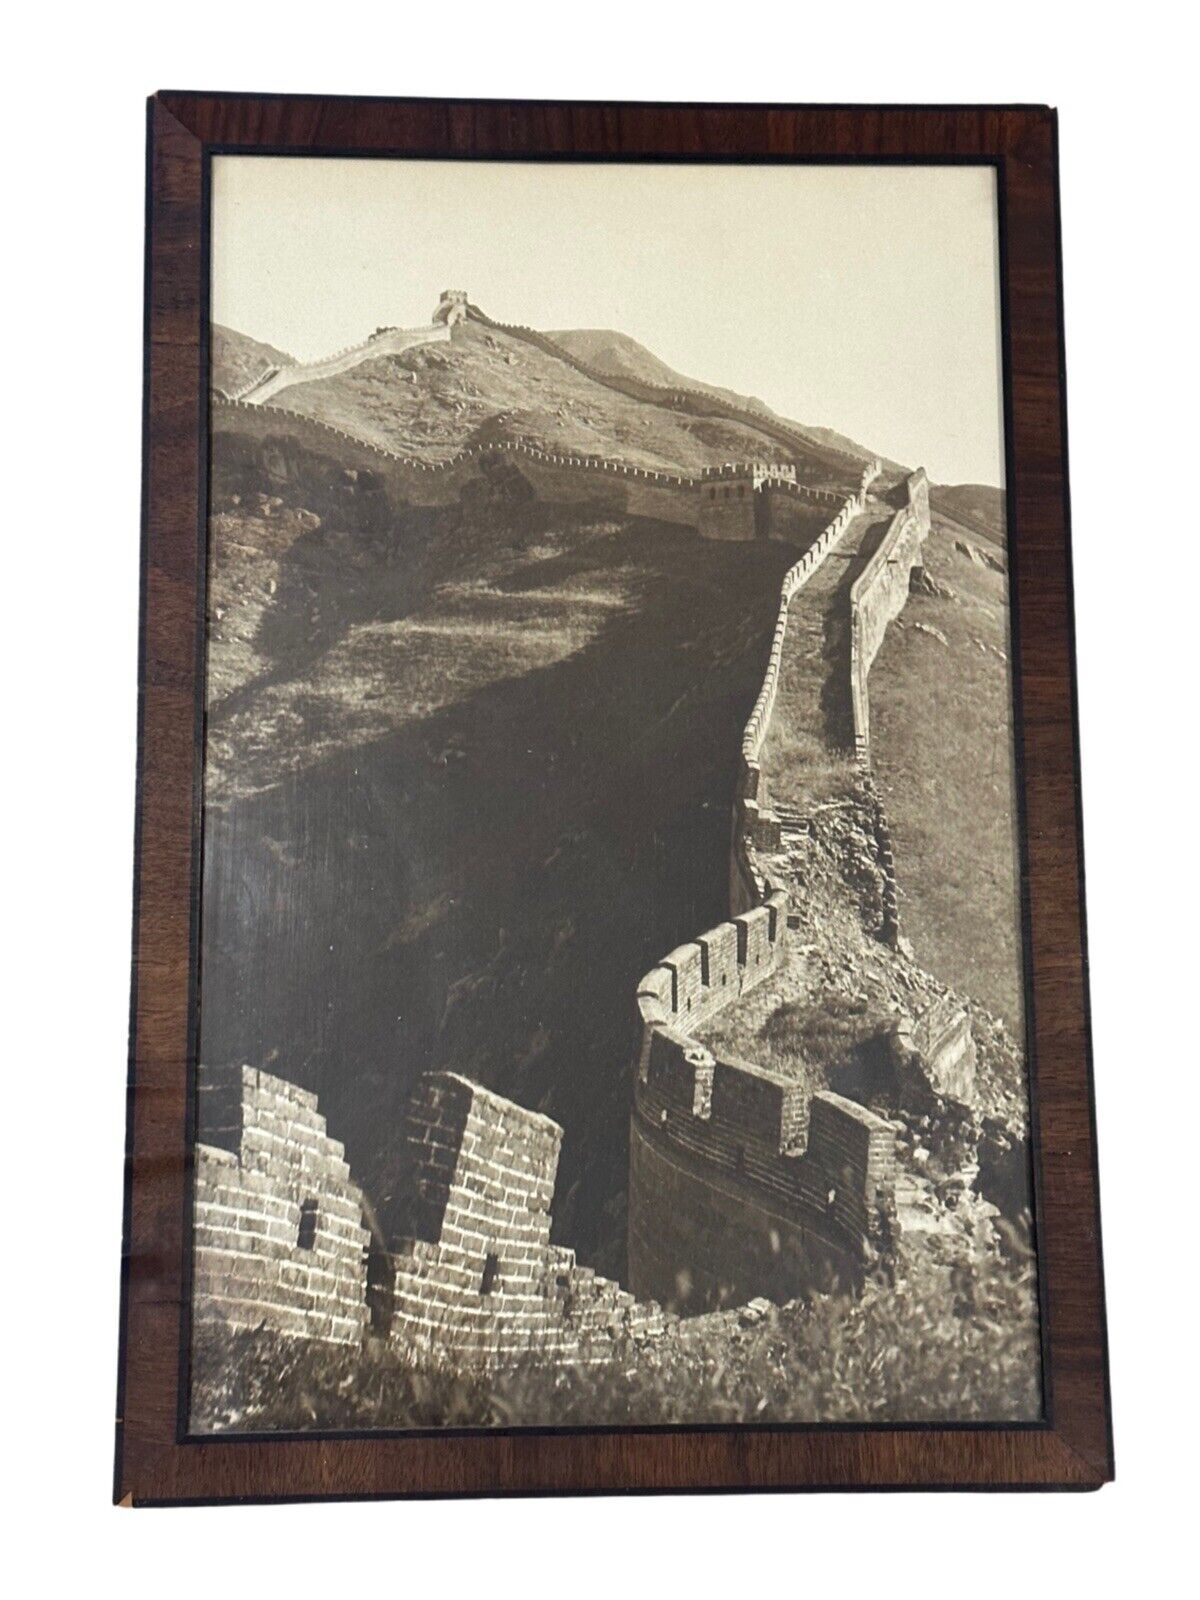 FRAMED VINTAGE ORIGINAL PHOTO: The Great Wall of China - 1930s 21”x14”